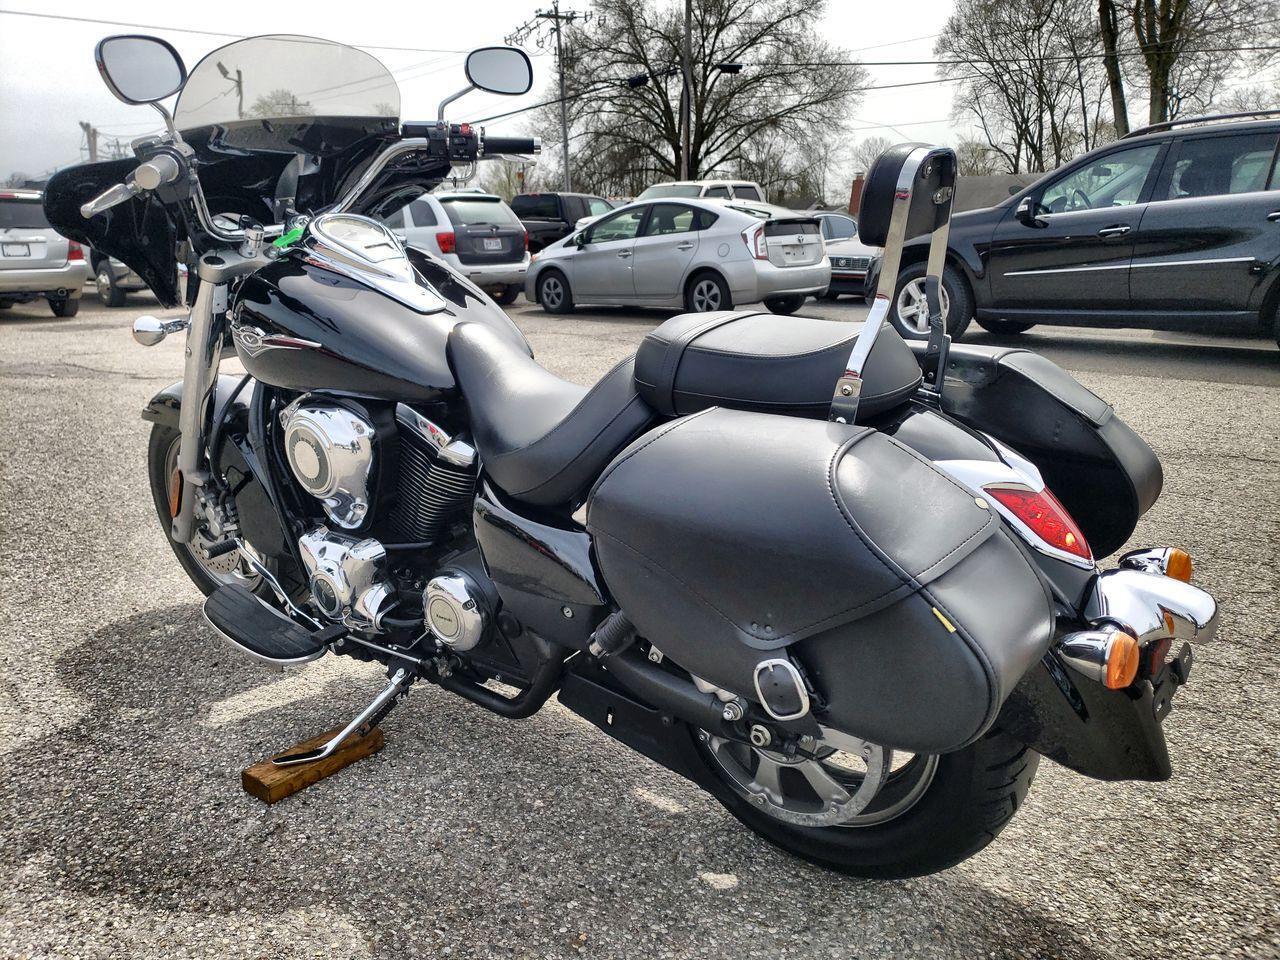 Owner 2009 KAWASAKI VN1700-E VULCAN CLASSIC, BLACK with 19708 Miles available now!